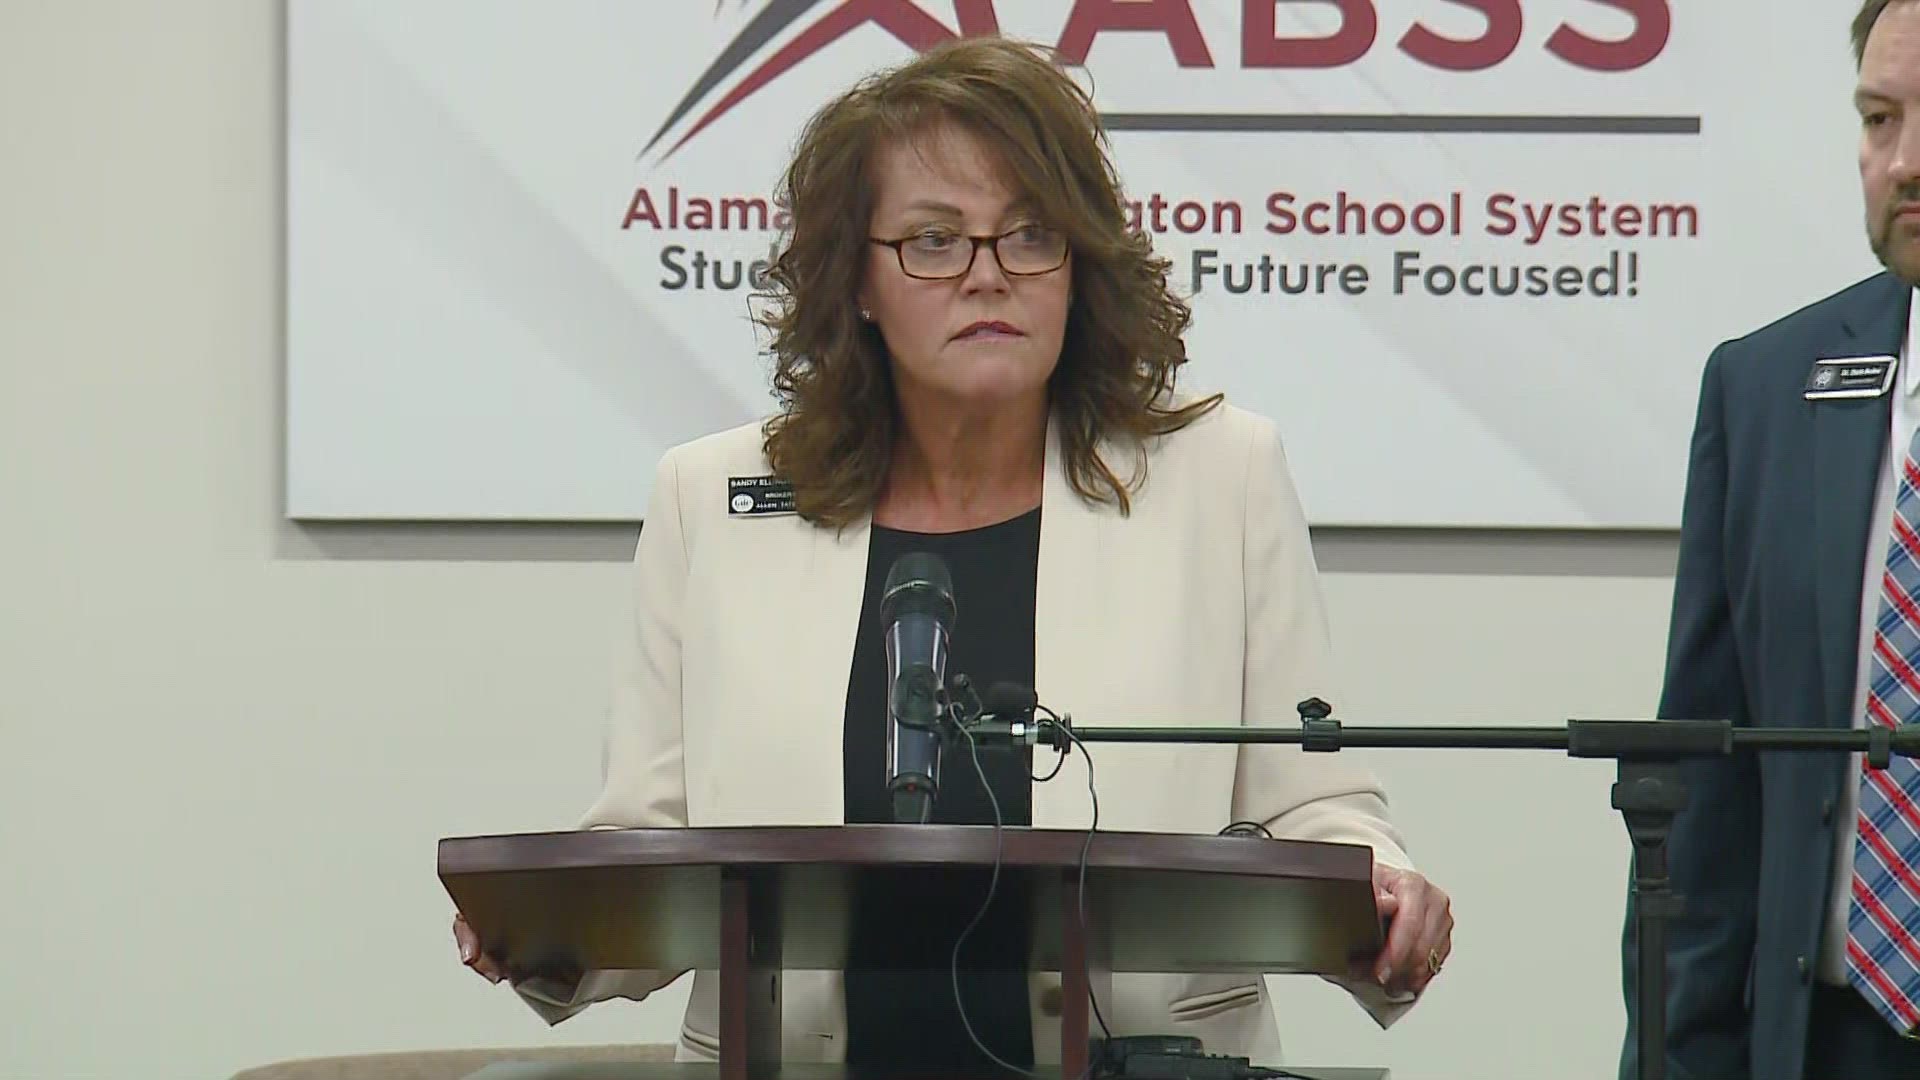 ABSS Board of Education Chair Sandy Ellington-Graves and Superintendent Dr. Butler will share details regarding the recent senior pranks at schools.